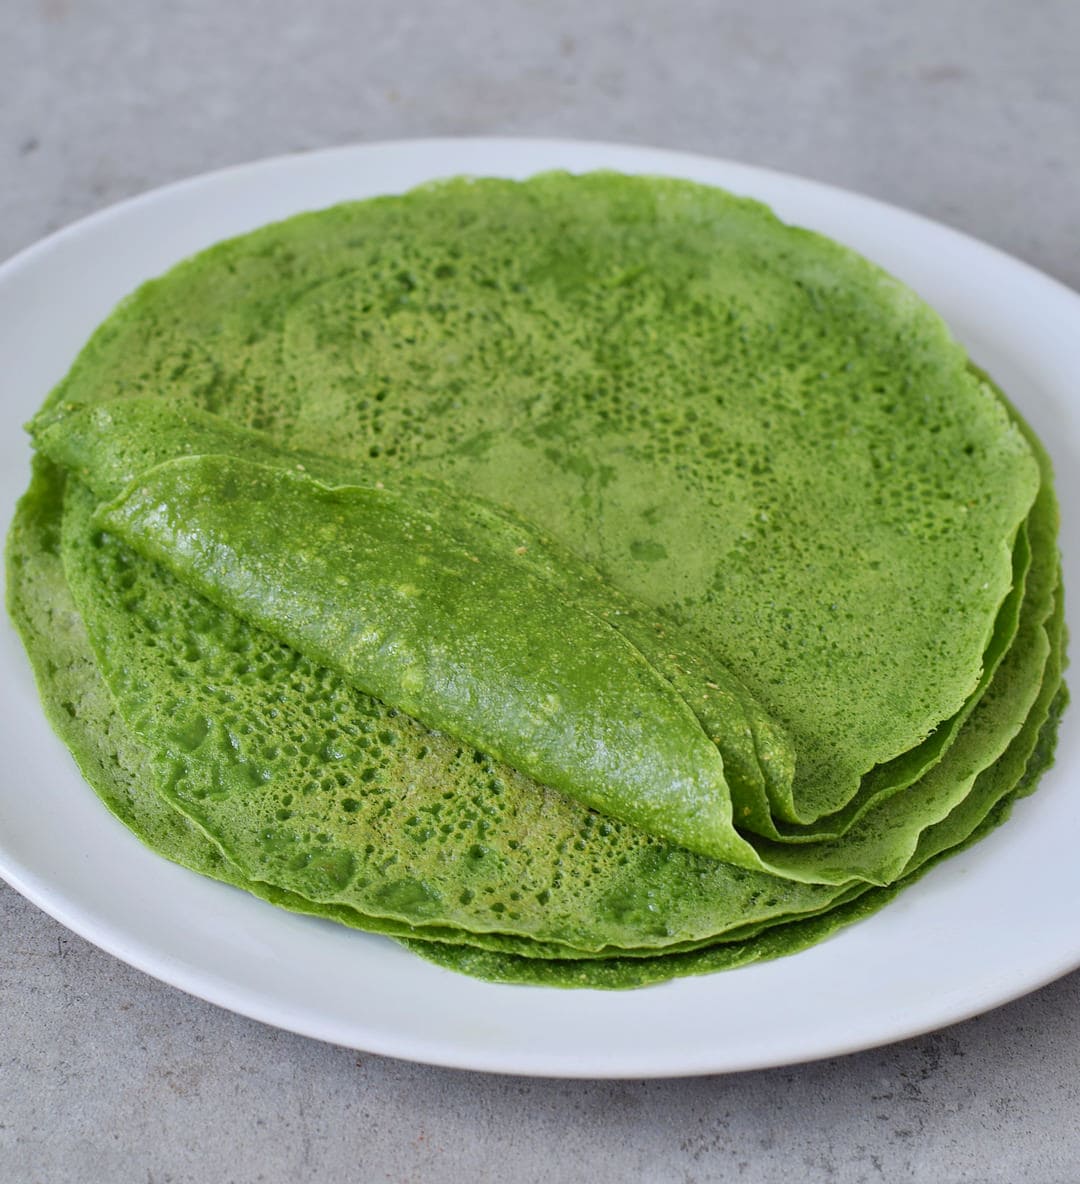 Homemade green spinach tortillas with 3 ingredients. The recipe is healthy, gluten-free, vegan, wheat-free, corn-free, great for kids, and easy to make. Perfect for wraps, tacos, burritos, enchiladas, quesadilla